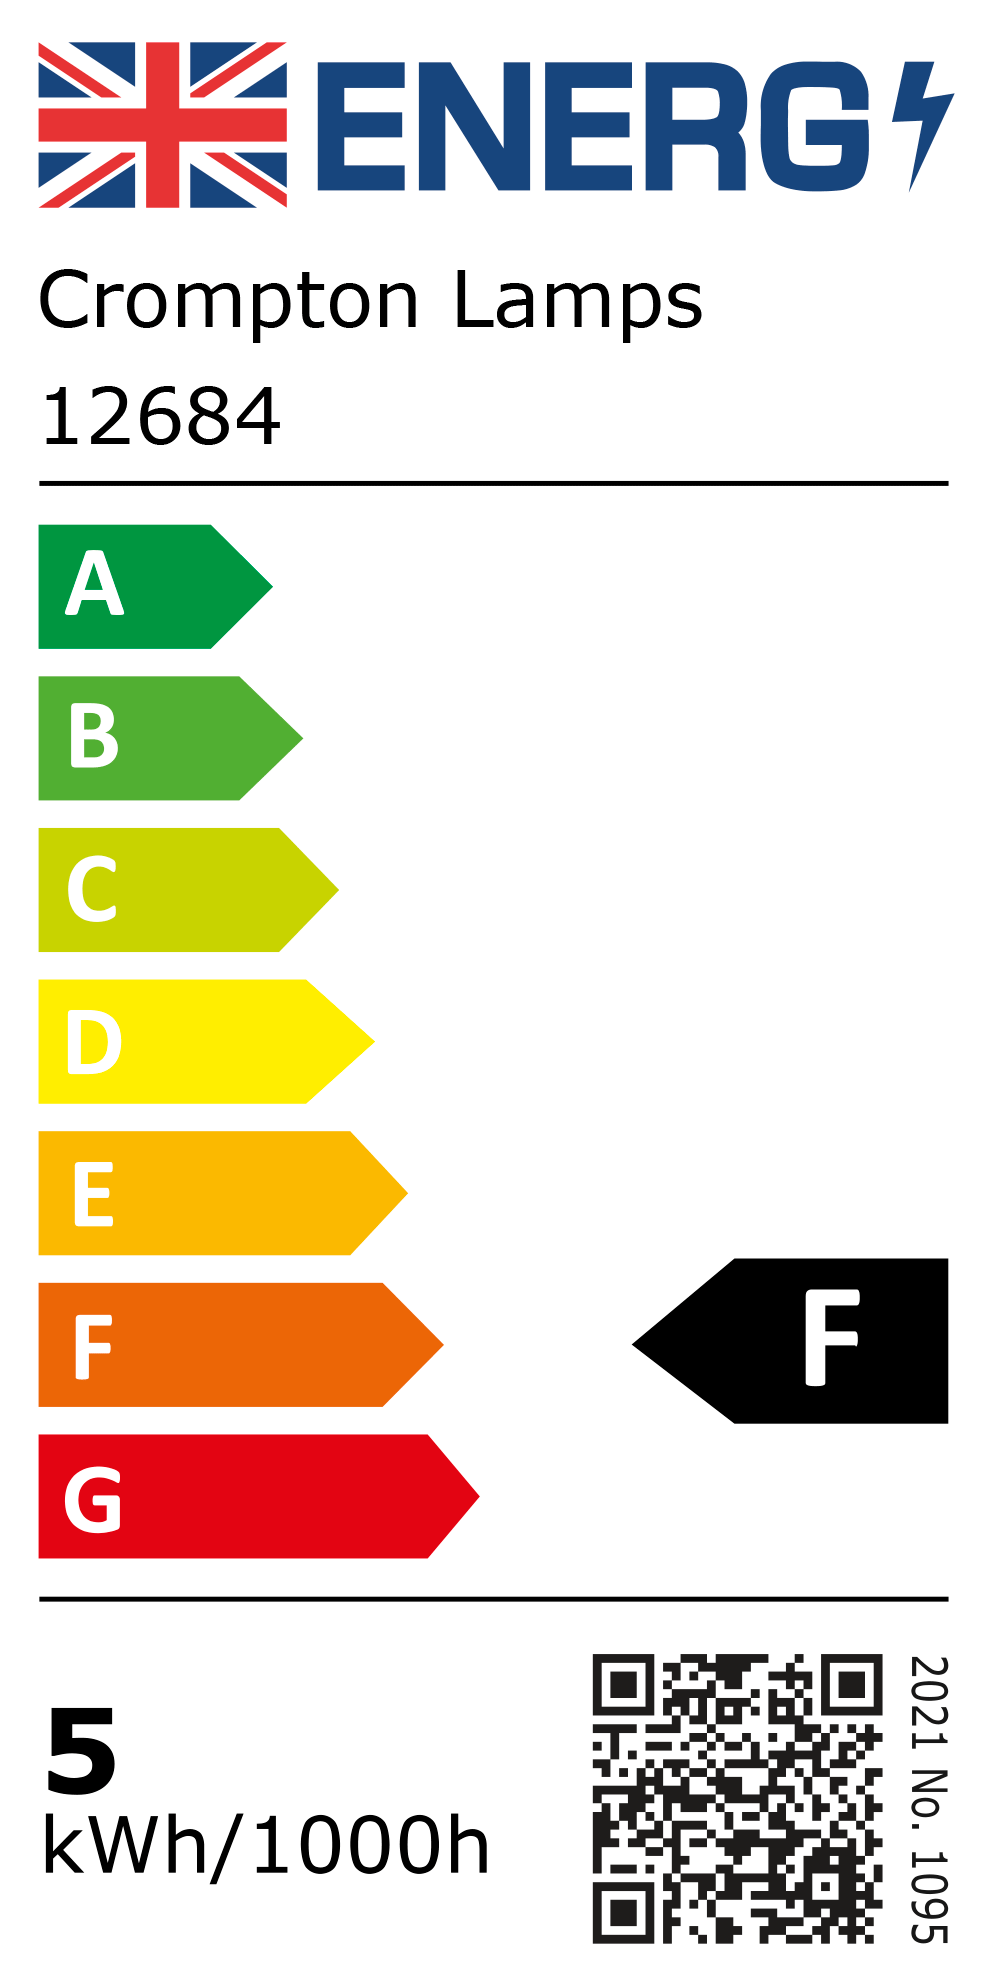 New 2021 Energy Rating Label: Stock Code 12684